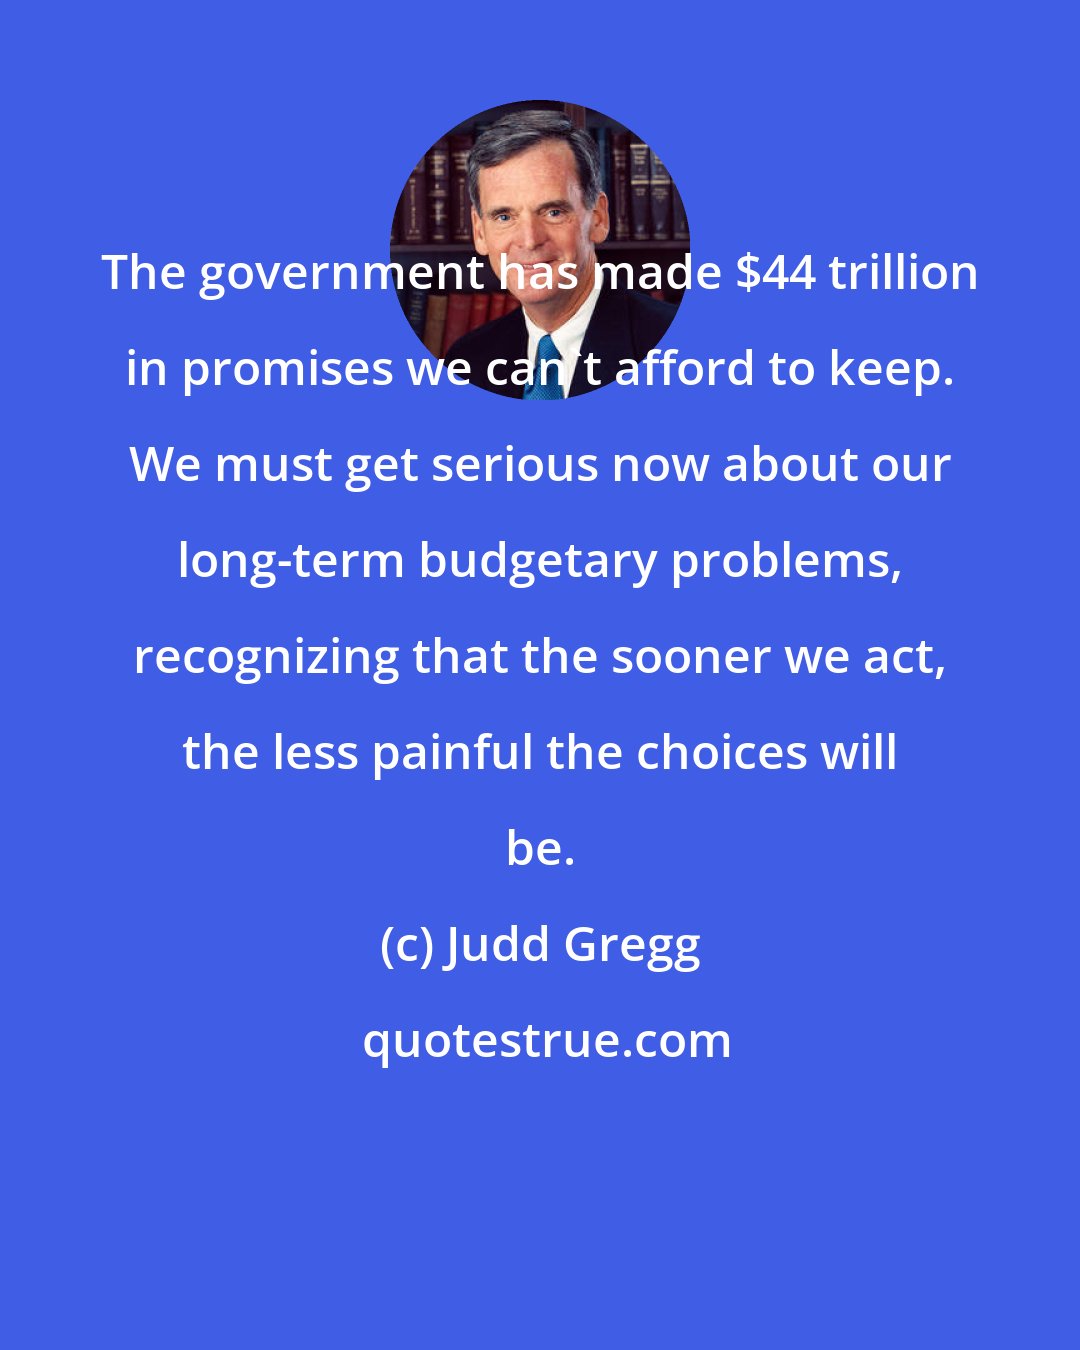 Judd Gregg: The government has made $44 trillion in promises we can't afford to keep. We must get serious now about our long-term budgetary problems, recognizing that the sooner we act, the less painful the choices will be.